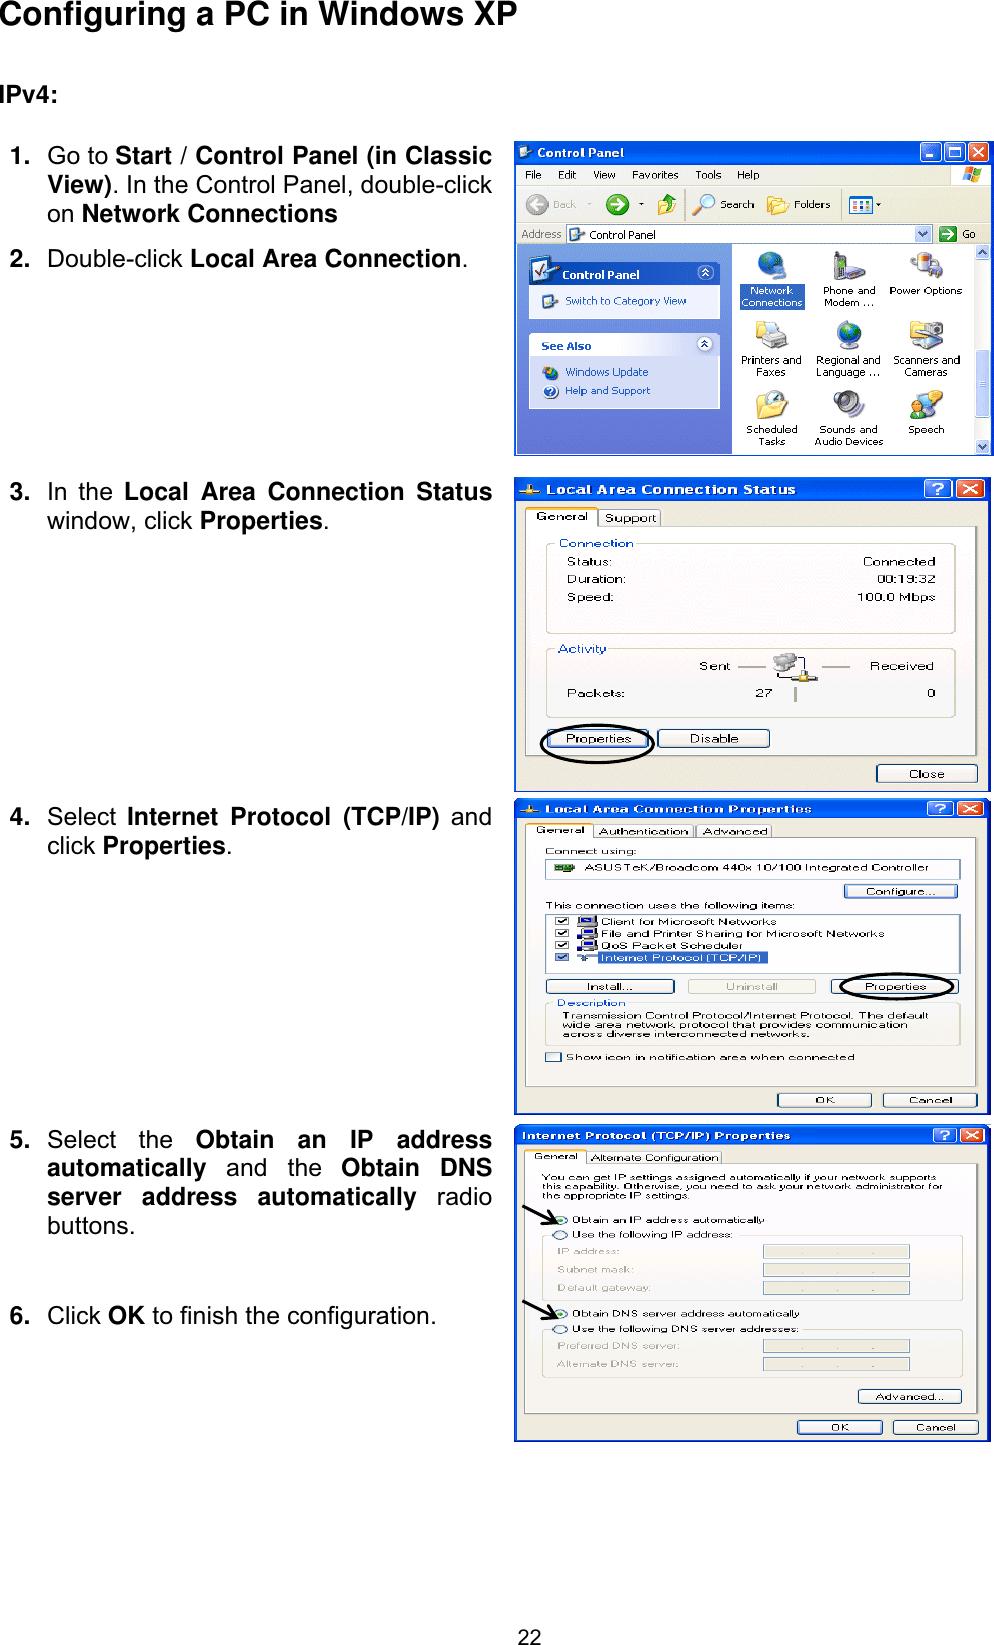 22Configuring a PC in Windows XP    IPv4:1. Go to Start / Control Panel (in Classic View). In the Control Panel, double-click on Network Connections2. Double-click Local Area Connection.3. In the Local Area Connection Statuswindow, click Properties.4. Select Internet Protocol (TCP/IP) and click Properties.5. Select the Obtain an IP address automatically  and the Obtain DNS server address automatically radiobuttons.6. Click OK to finish the configuration. 